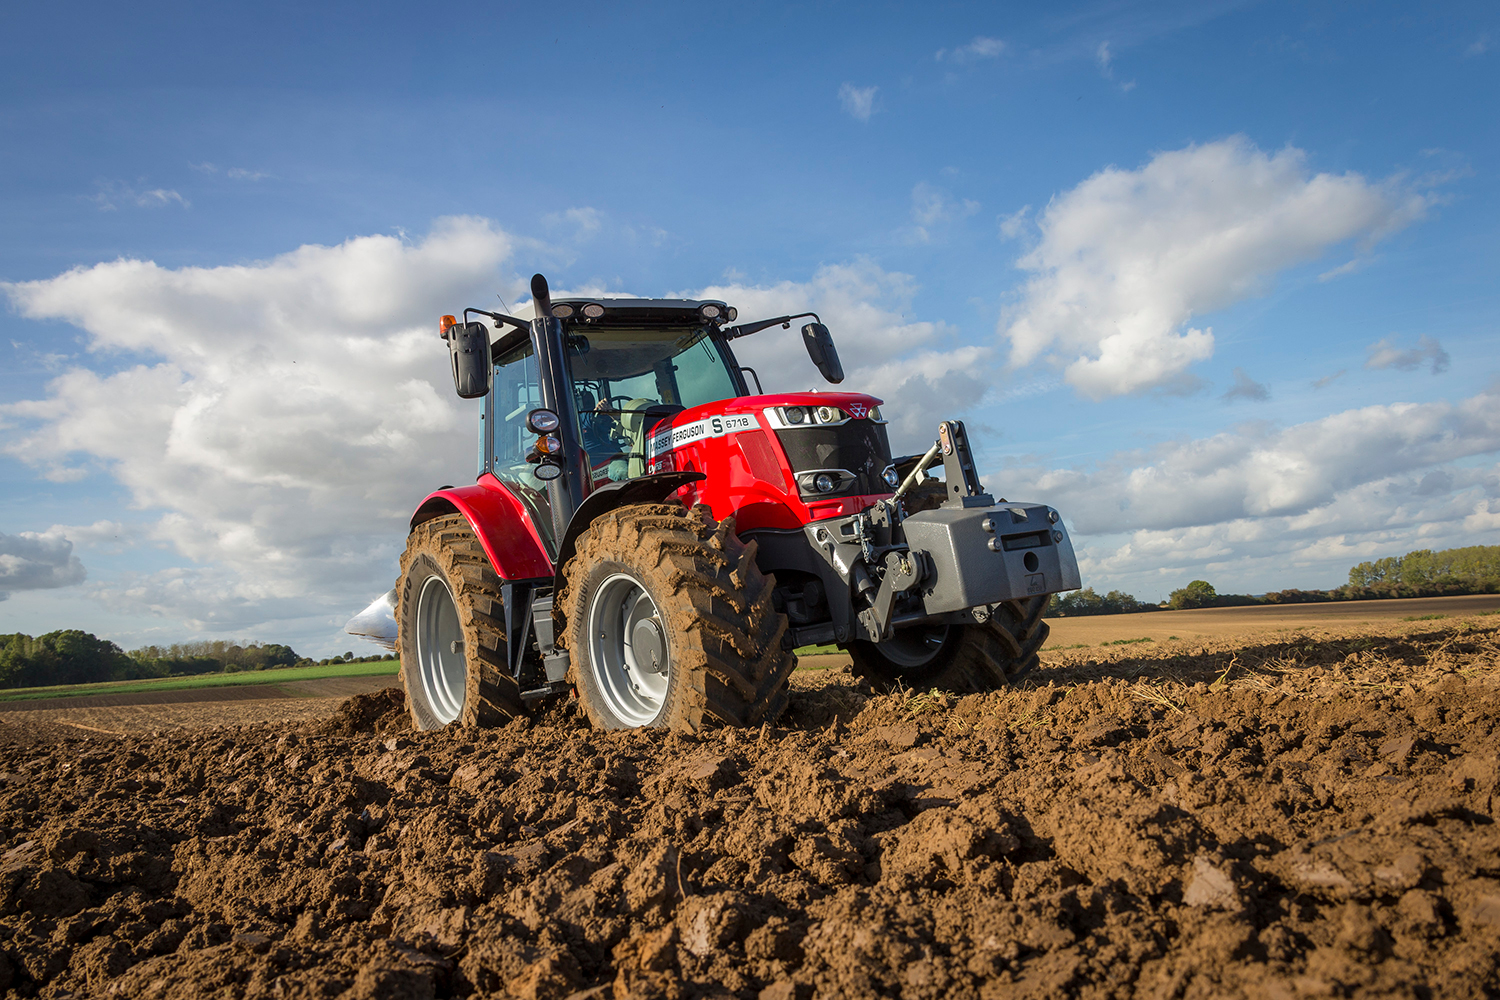 Tractor Services C.I. – Tractor Sales & Service